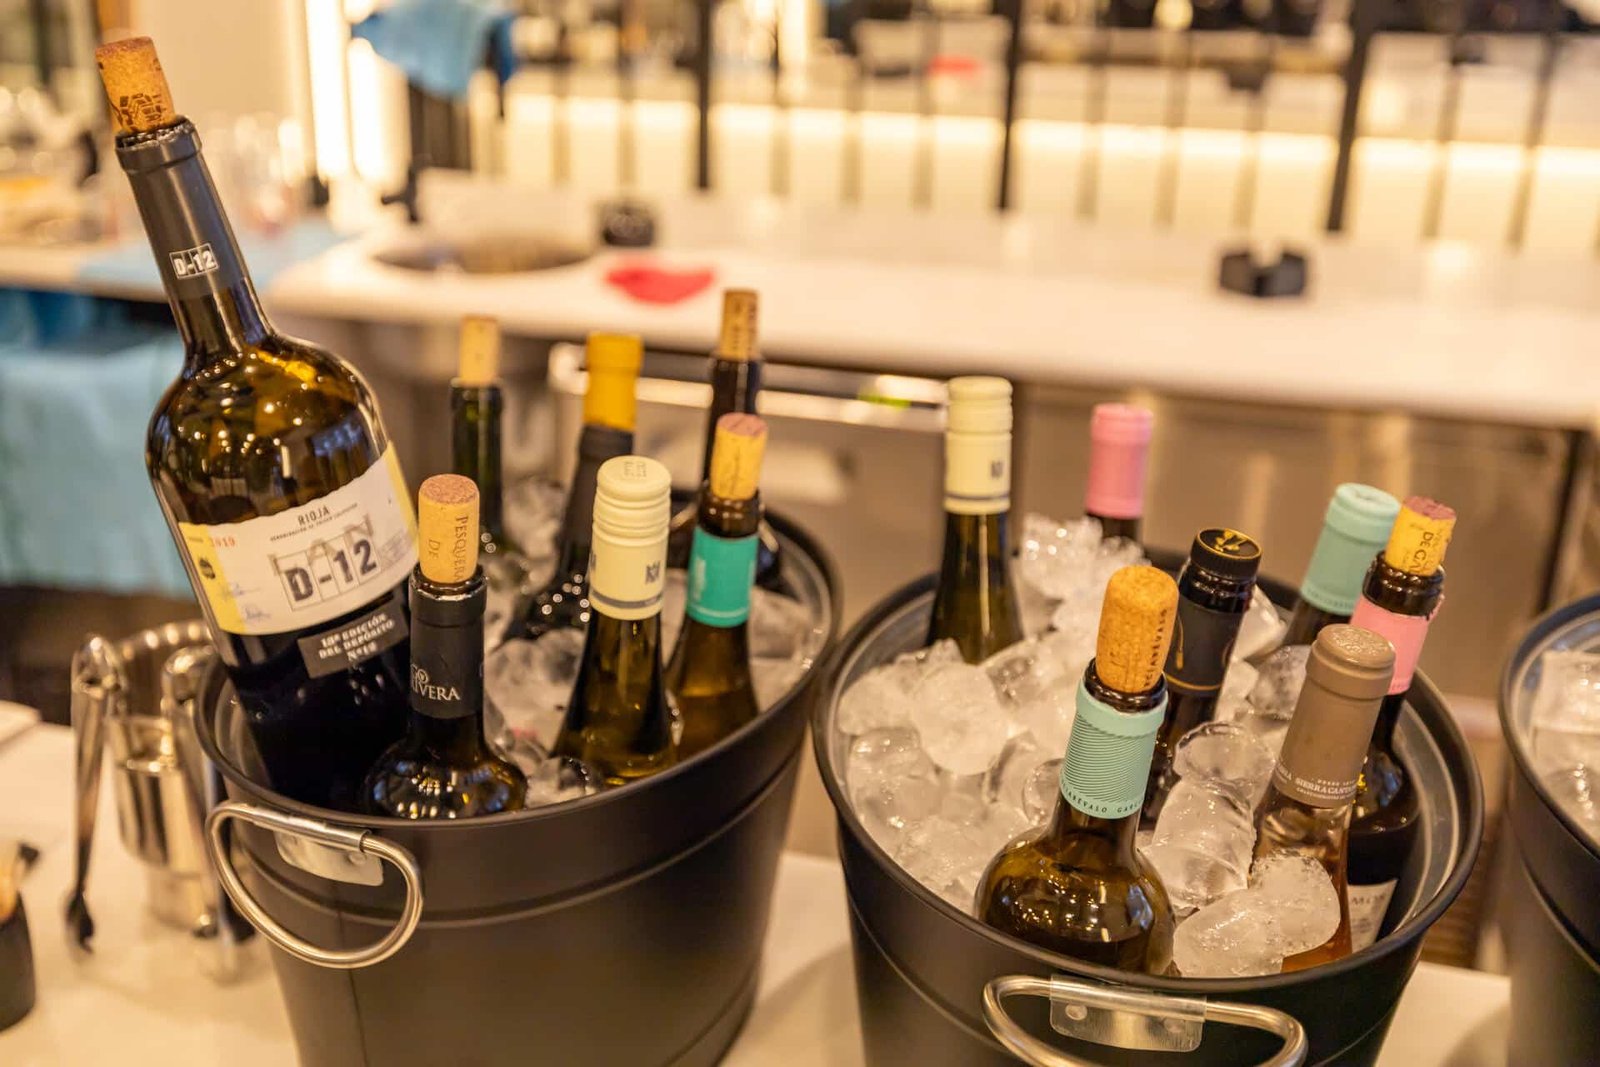 Top Wine Bars in Marbella for Stylish Sipping and Savouring. - header top wine bars marbs - Tourism -